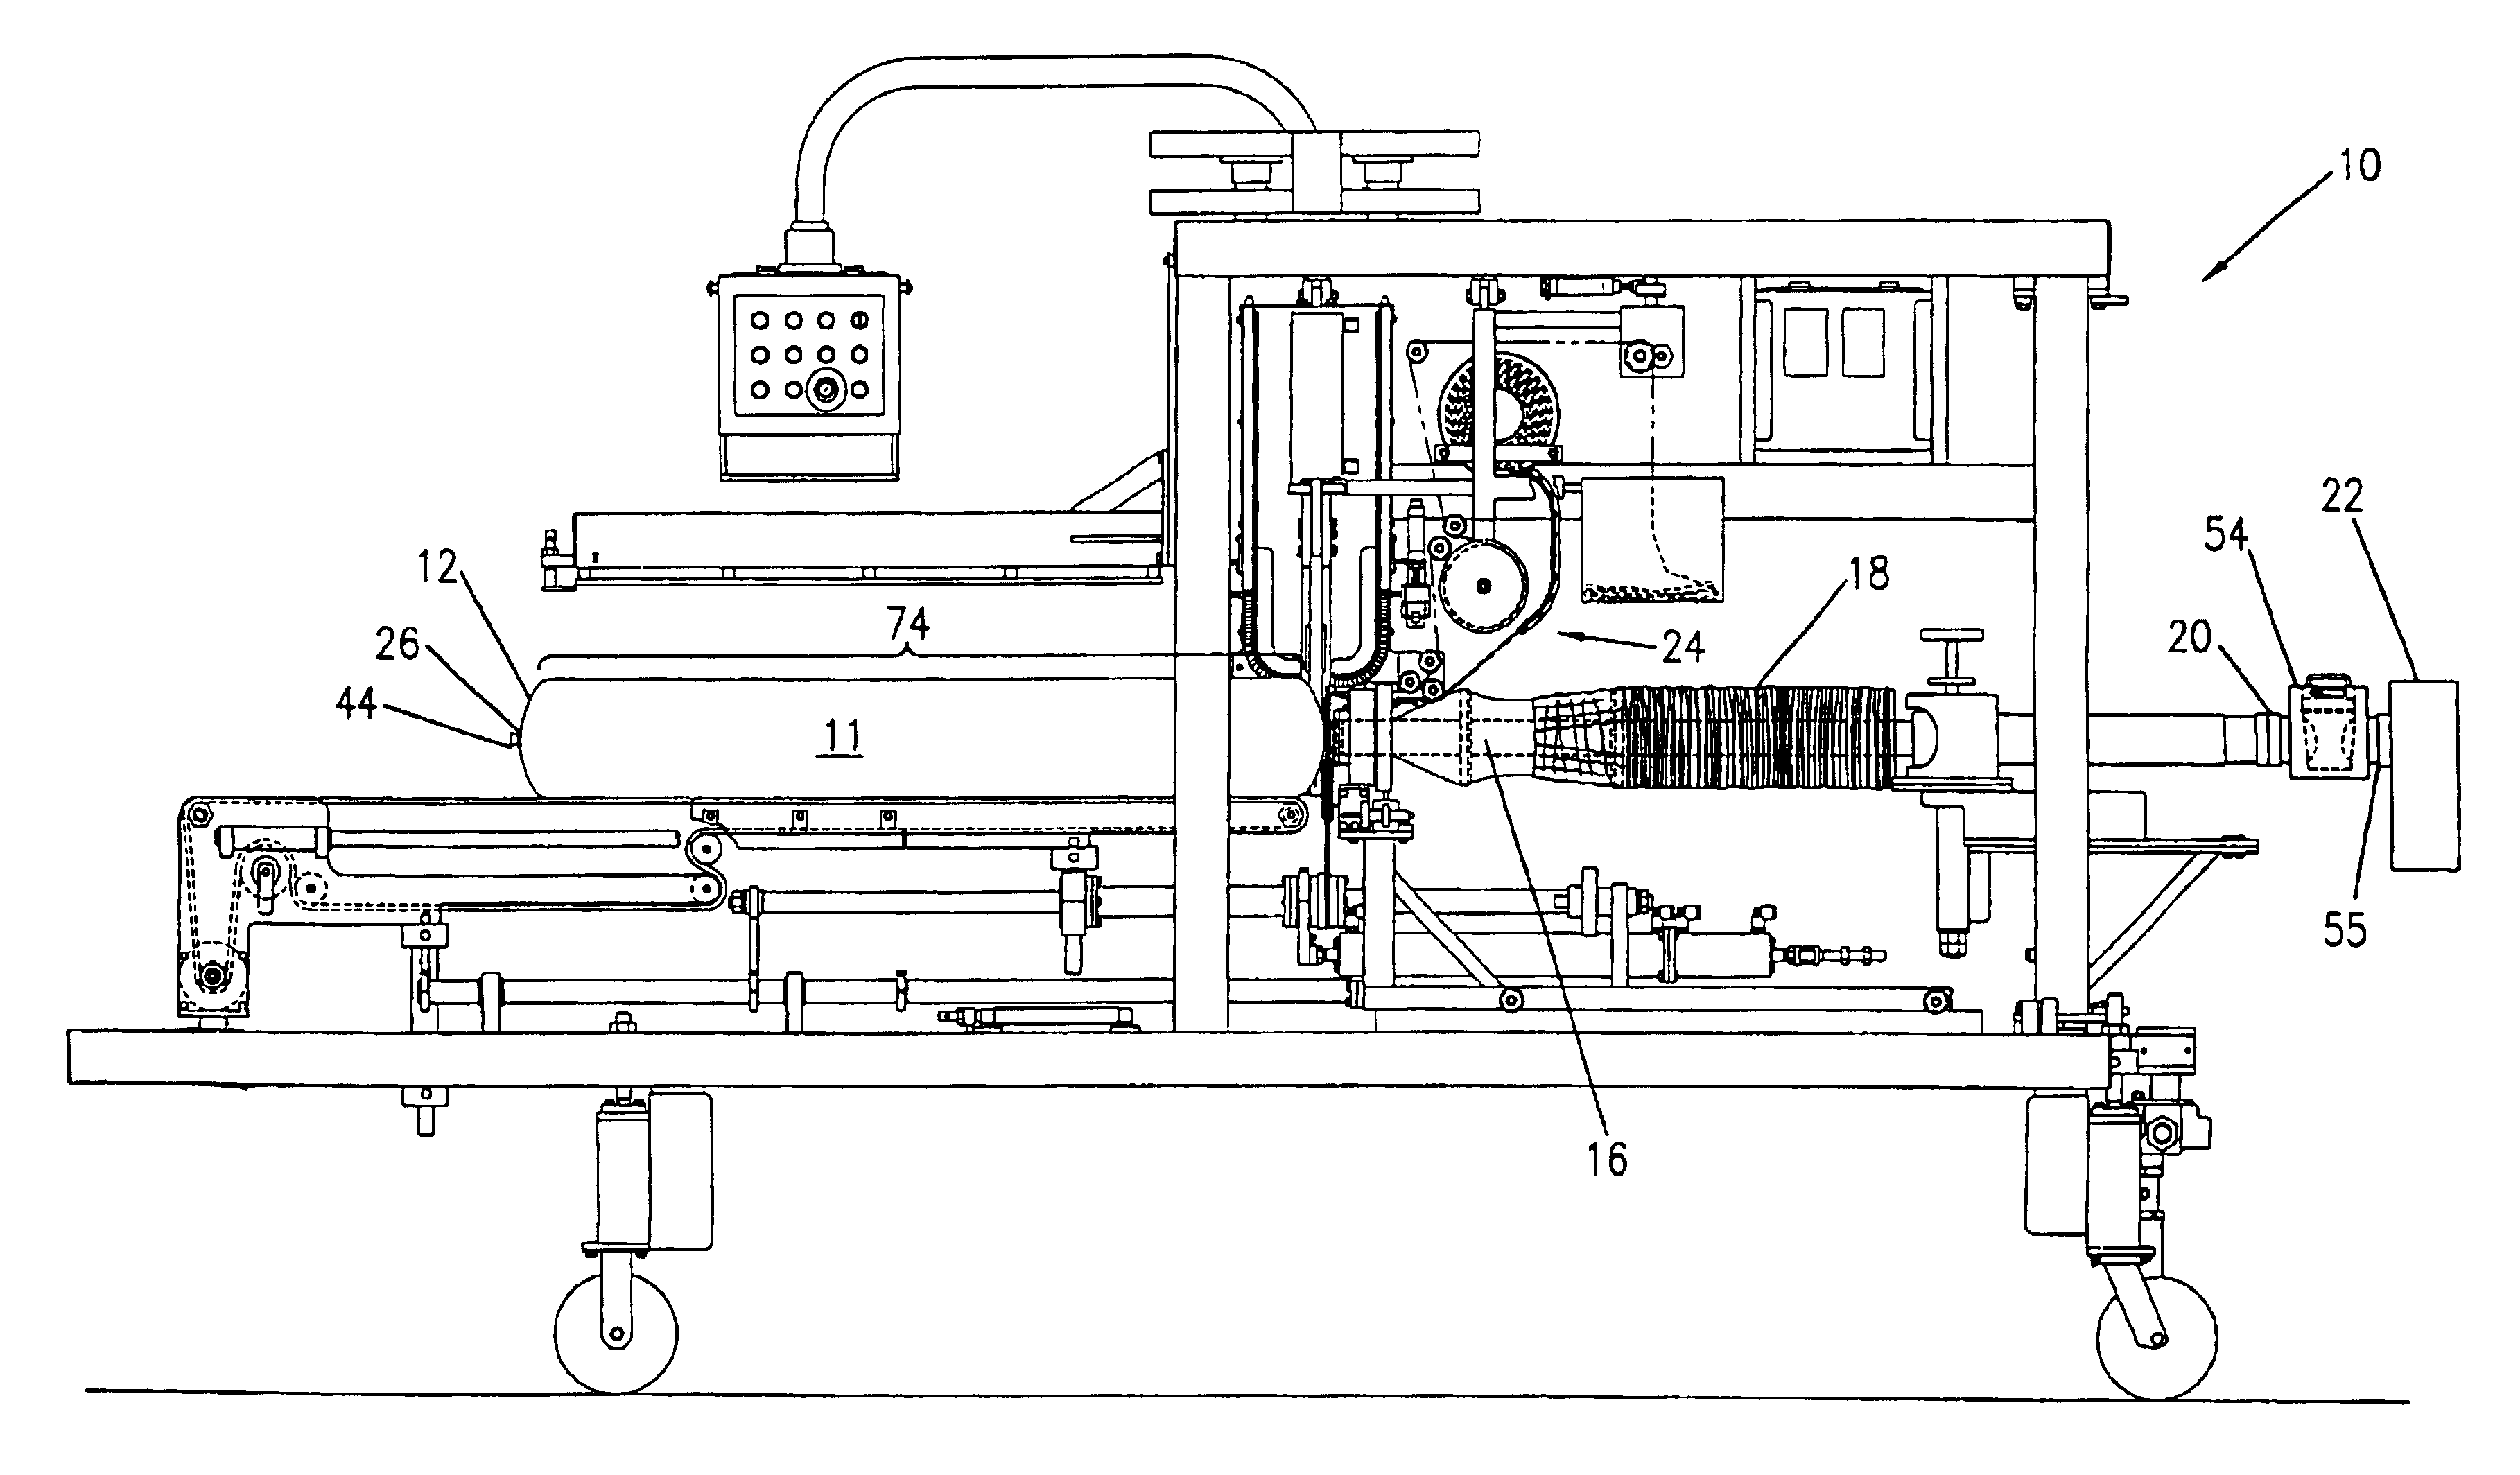 Apparatus for automatically stuffing food casing